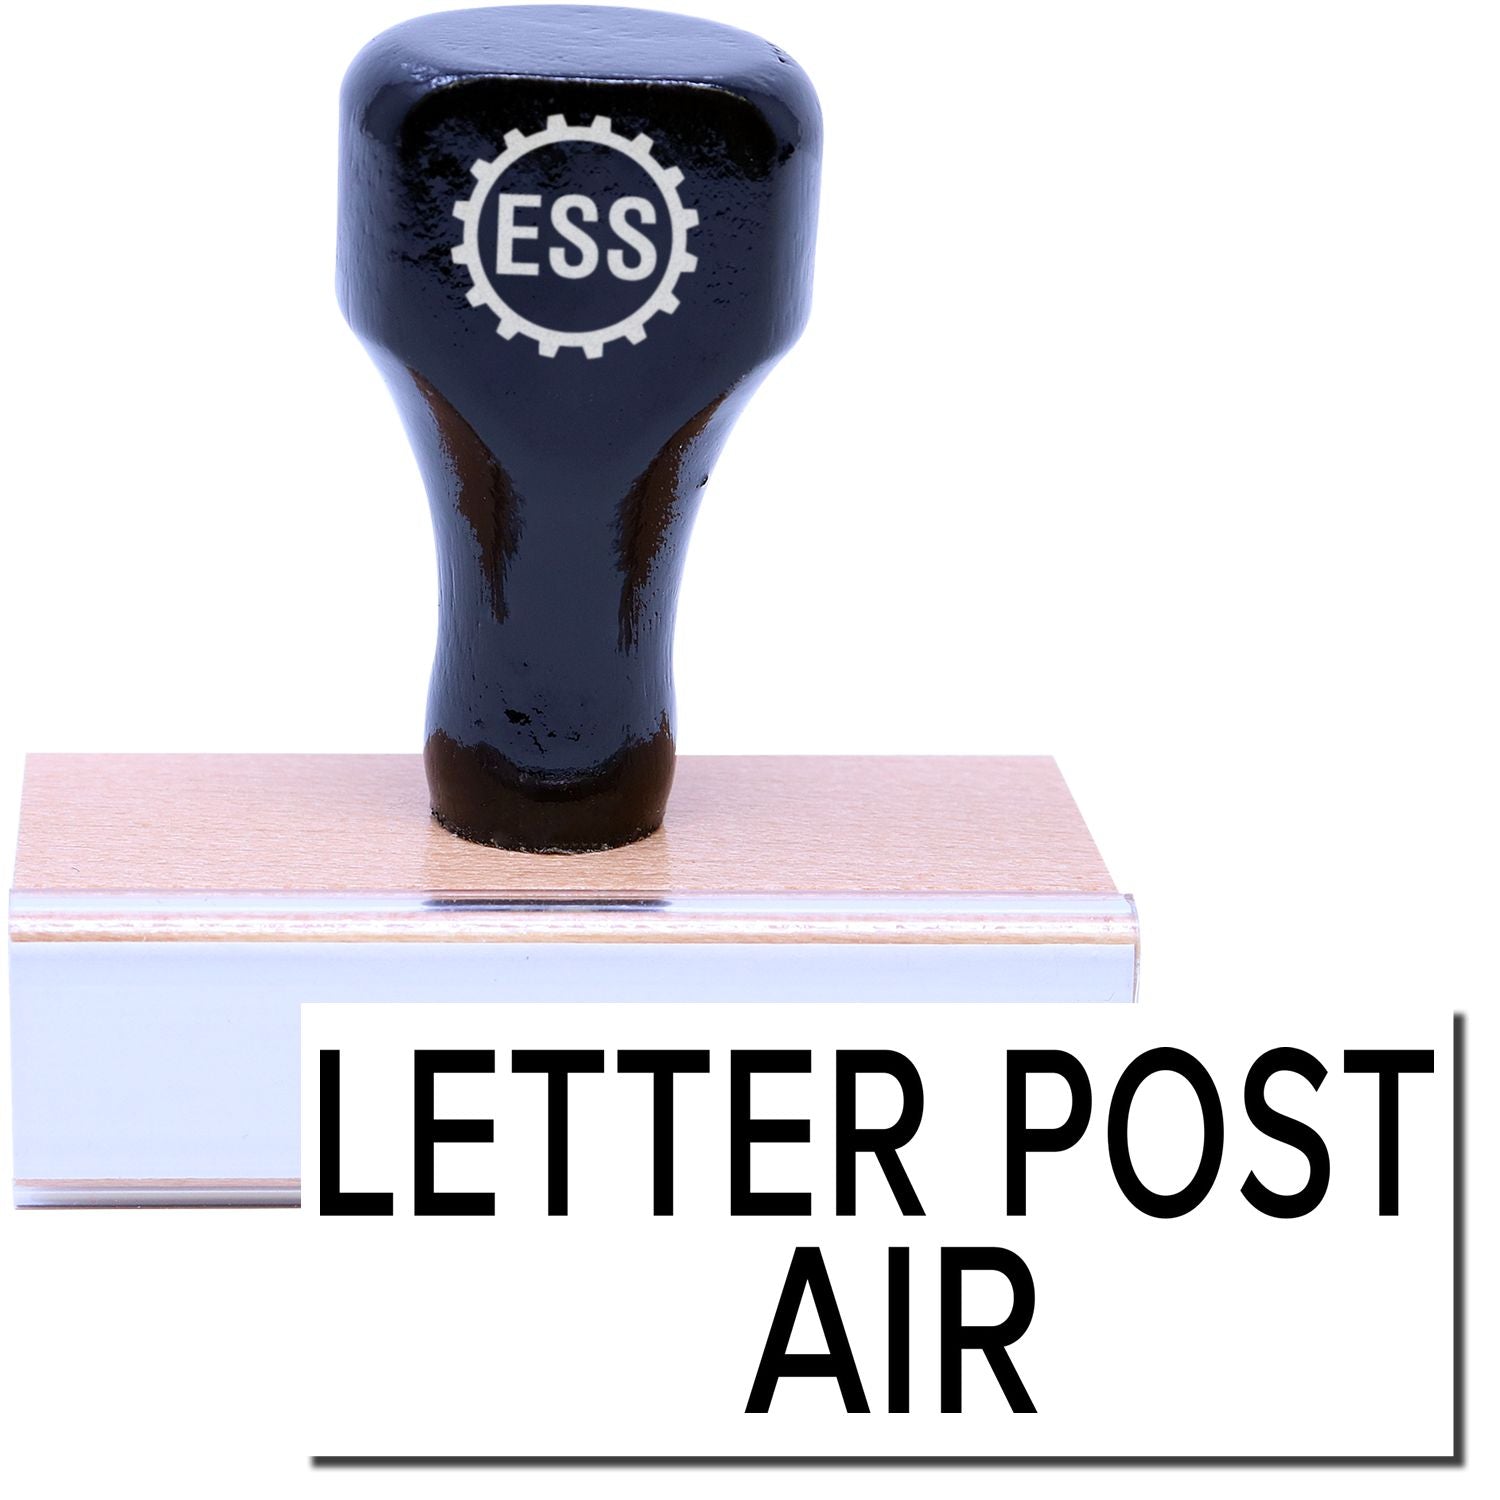 A stock office rubber stamp with a stamped image showing how the text "LETTER POST AIR" is displayed after stamping.